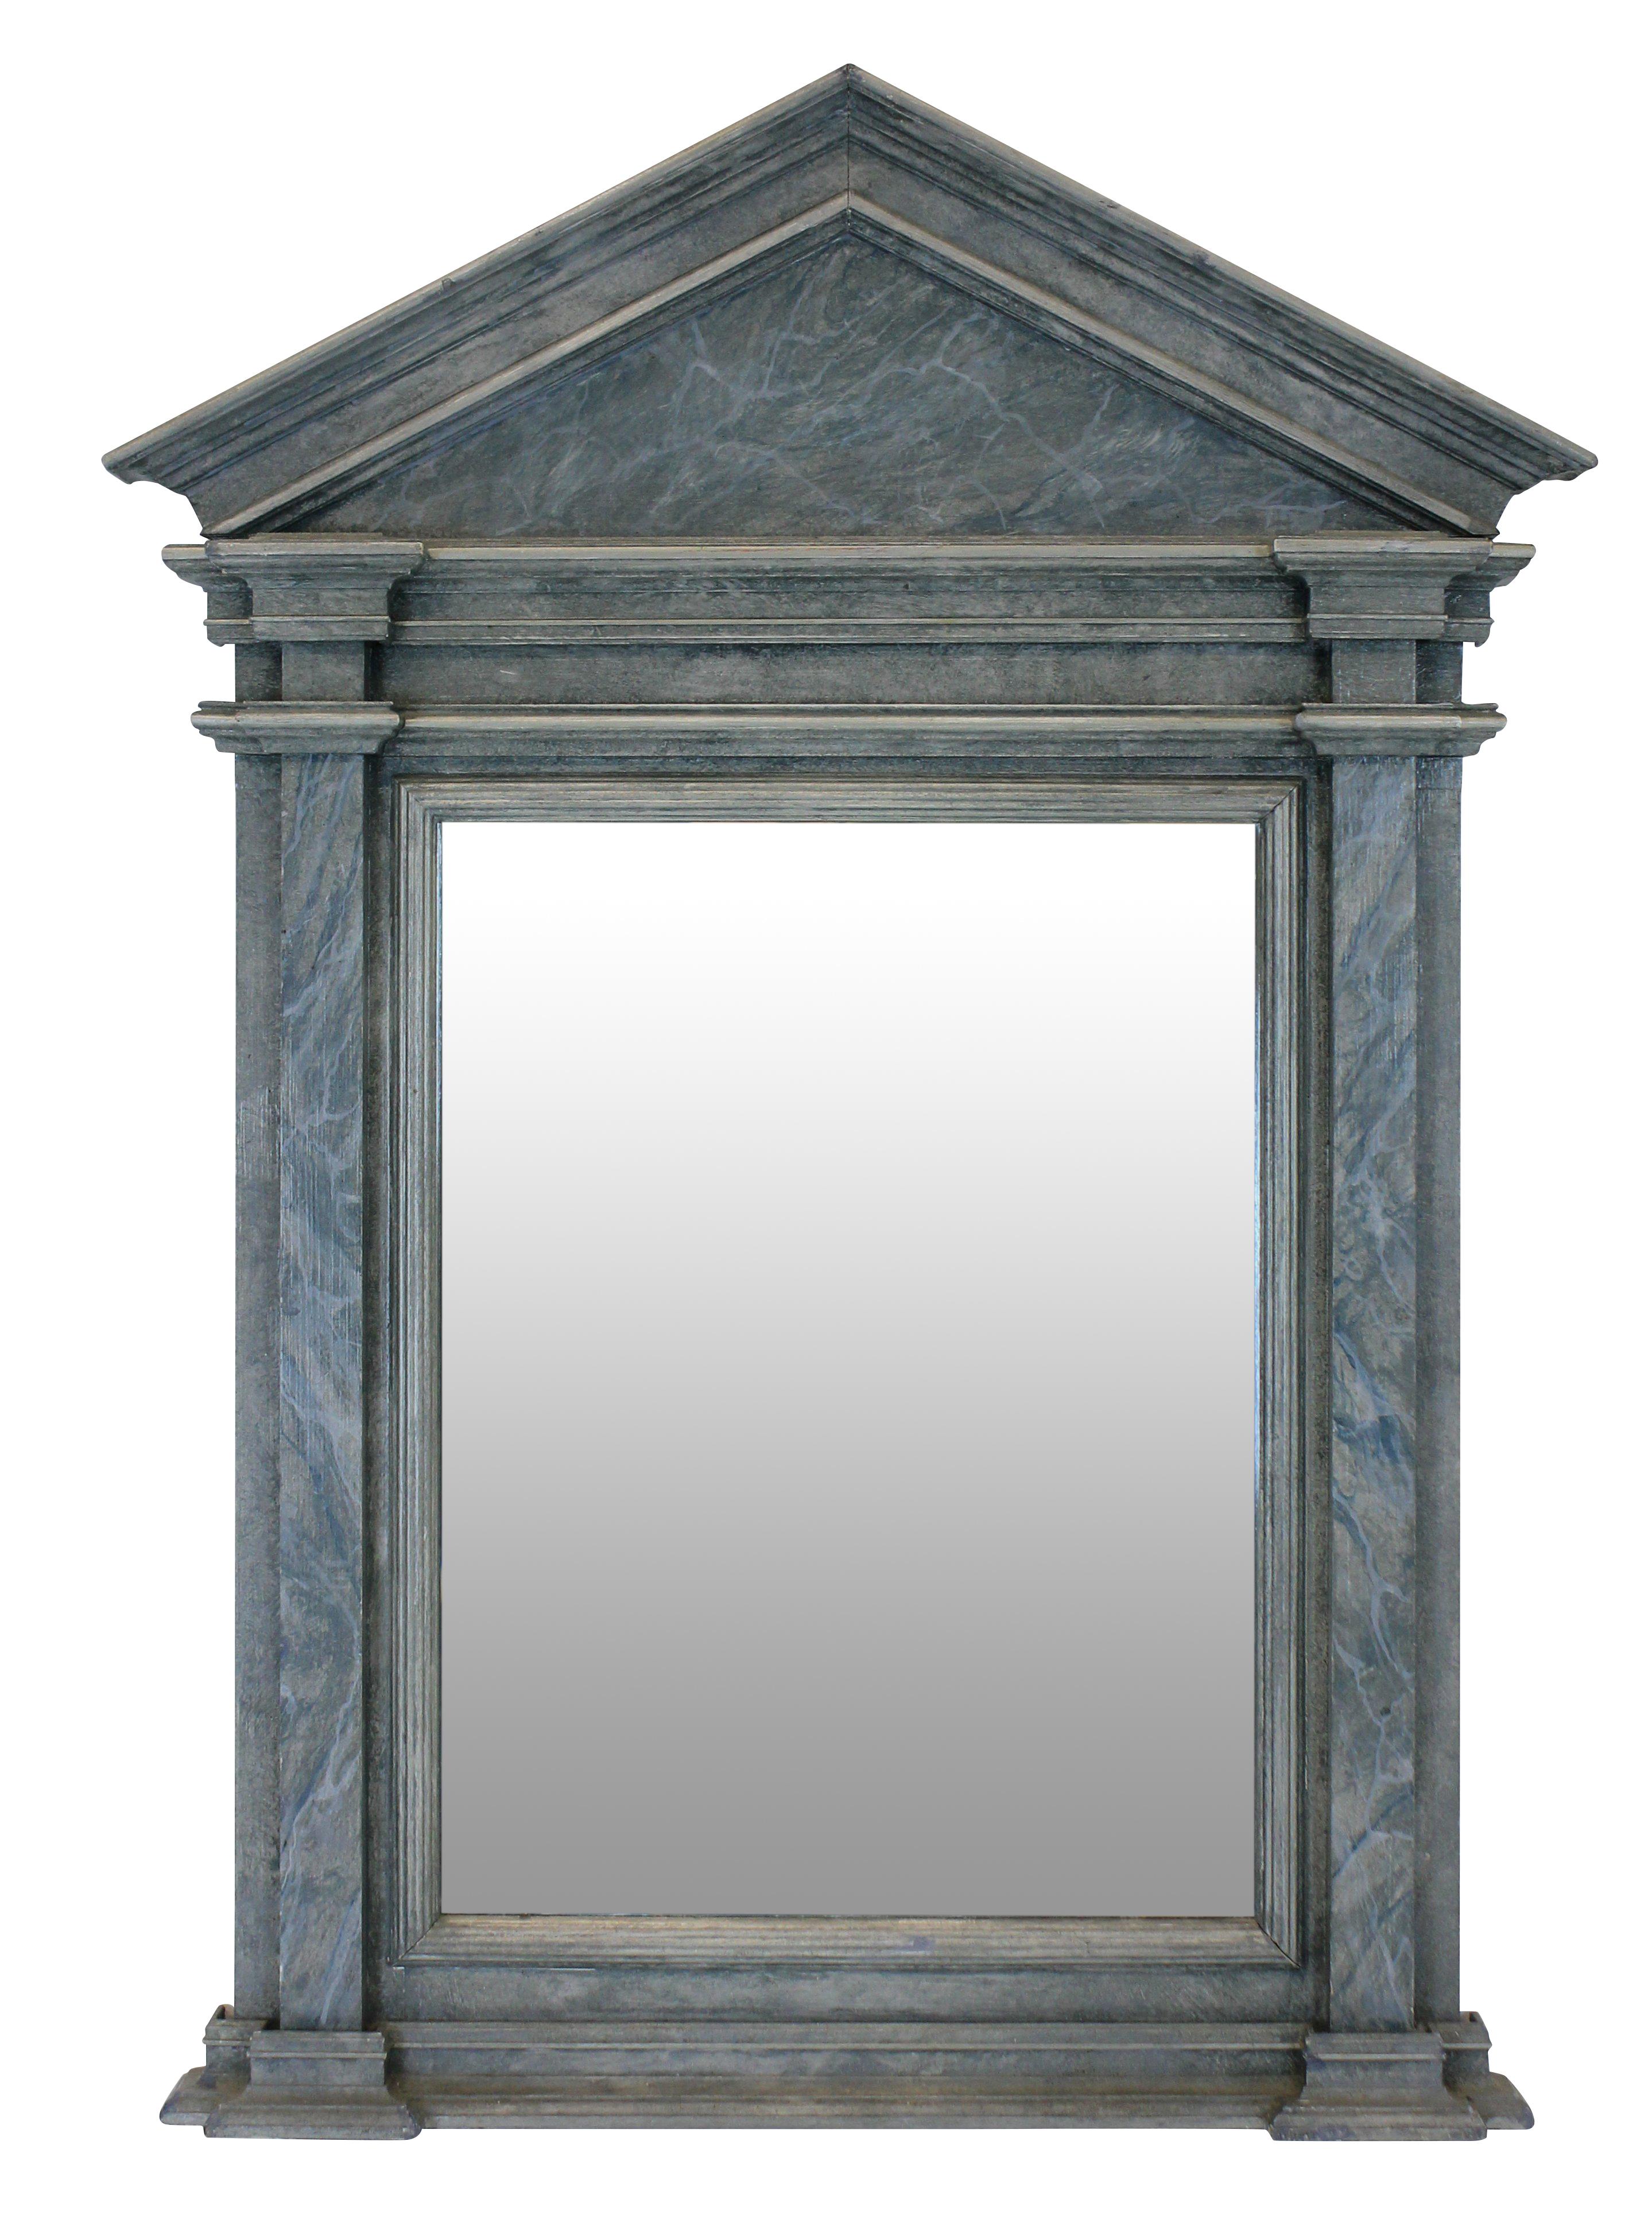 Neoclassical Midcentury Faux Marble Pediment Mirror